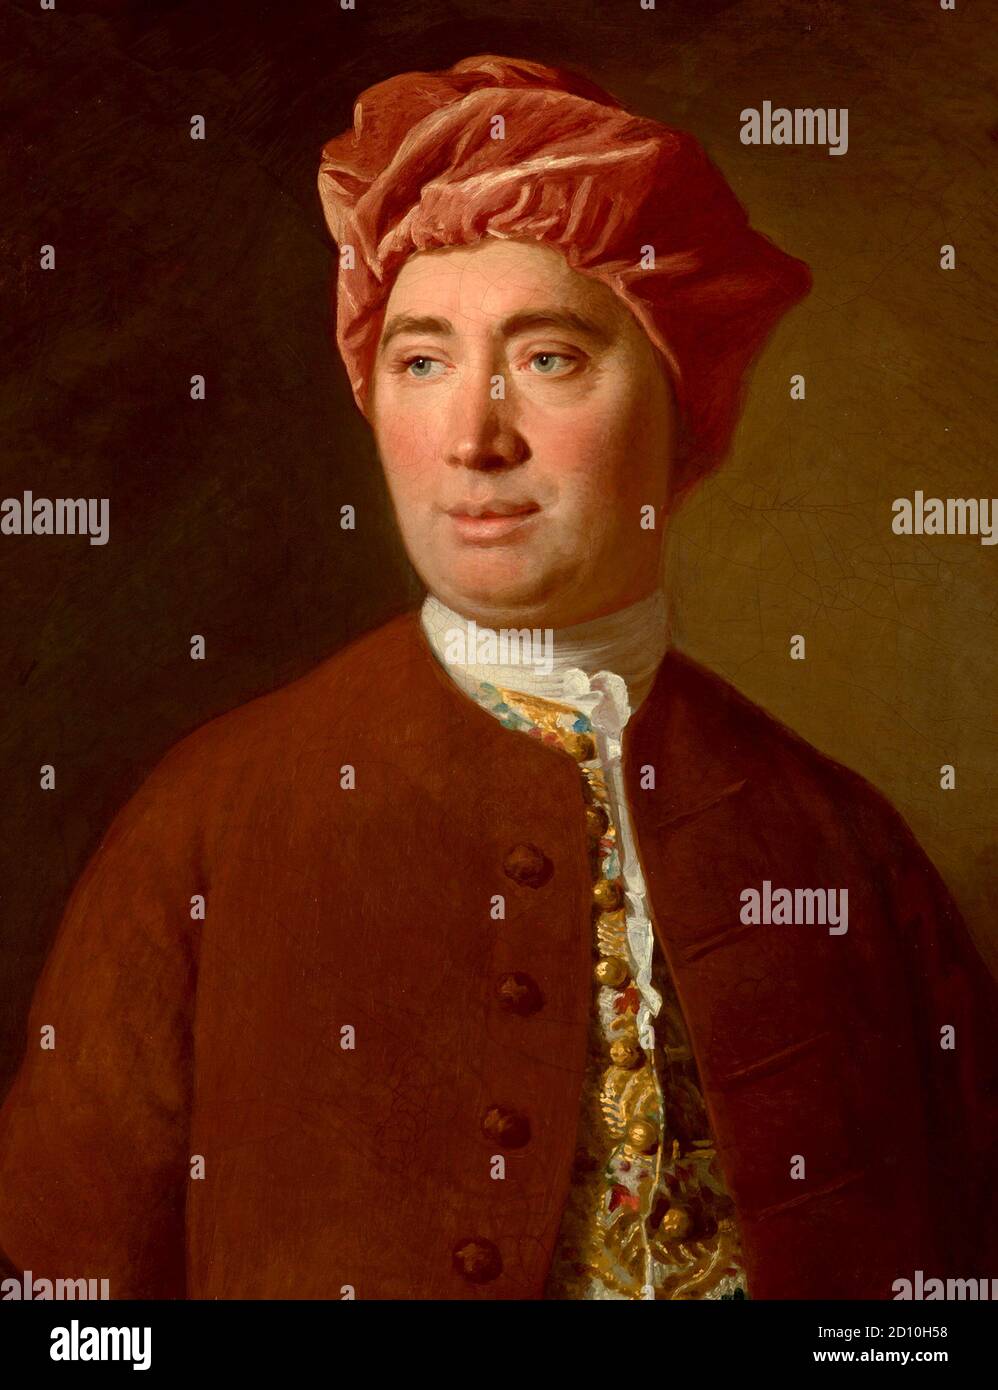 David Hume (born David Home; 1711 – 25) Scottish philosopher, historian and essayist, who is best known today for his highly influential system of philosophical empiricism, skepticism, and naturalism. Stock Photo